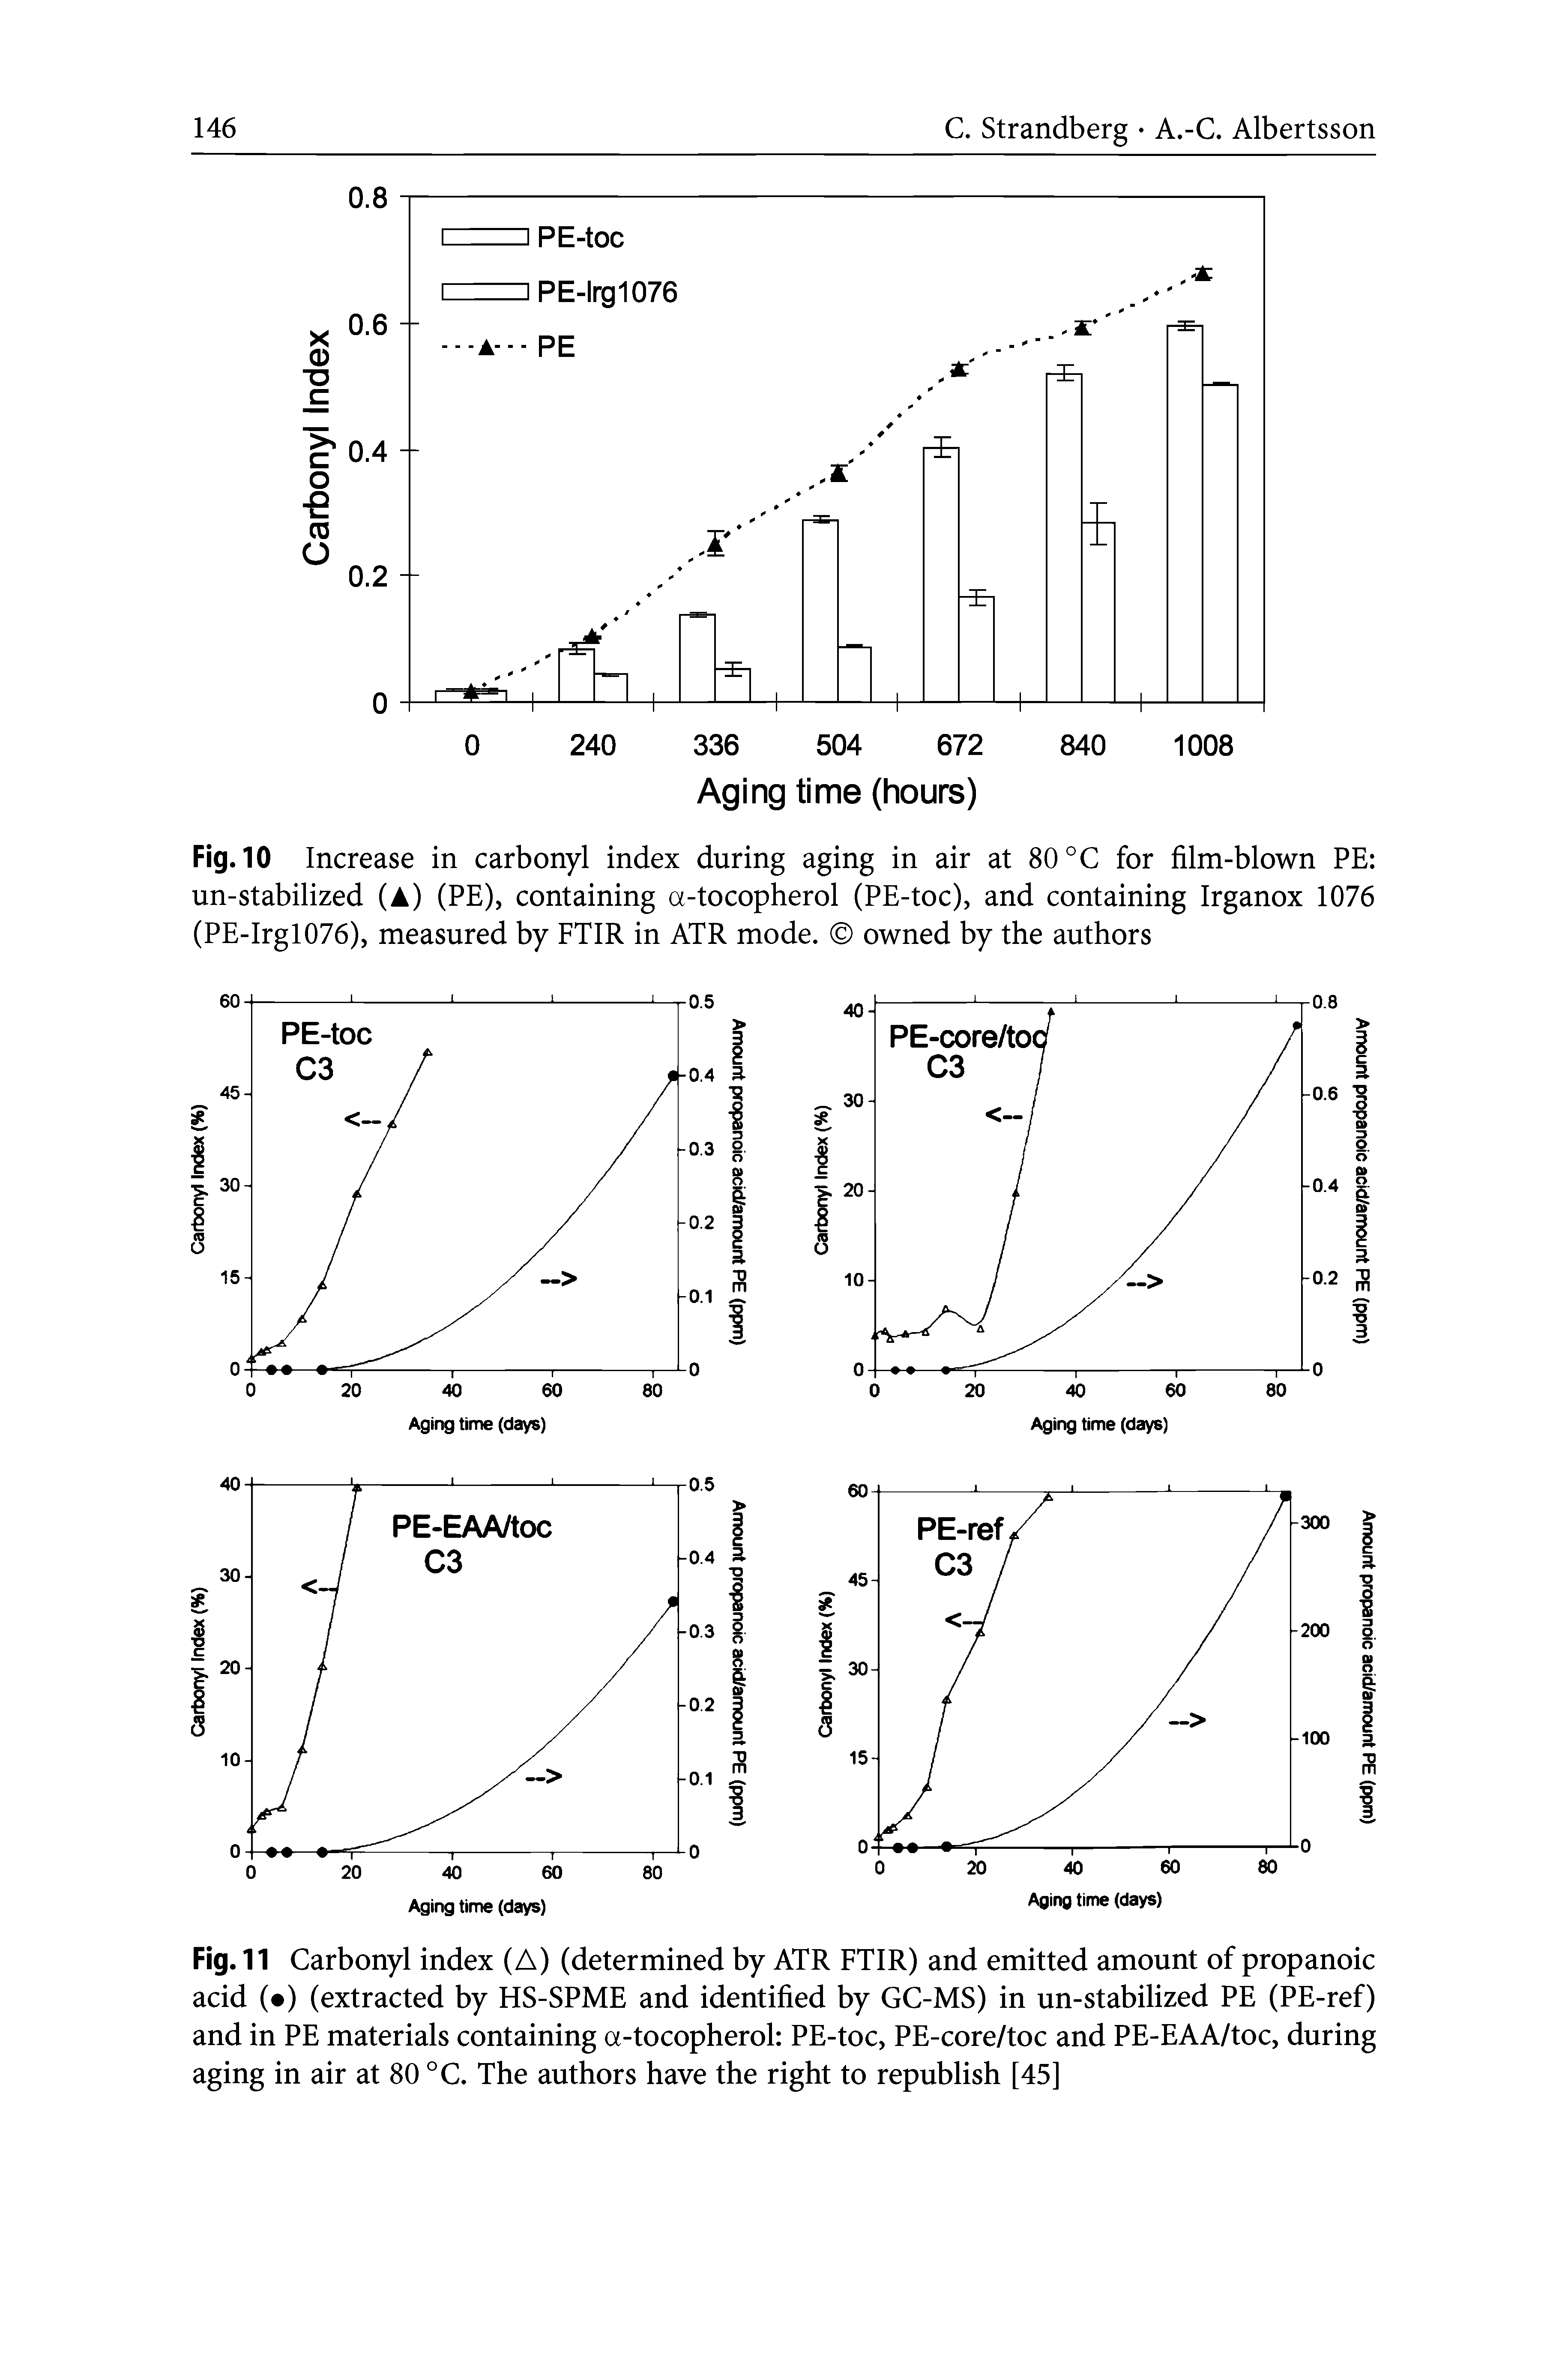 Fig. 10 Increase in carbonyl index during aging in air at 80 °C for film-blown PE un-stabilized (A) (PE), containing a-tocopherol (PE-toc), and containing Irganox 1076 (PE-Irgl076), measured by FTIR in ATR mode. owned by the authors...